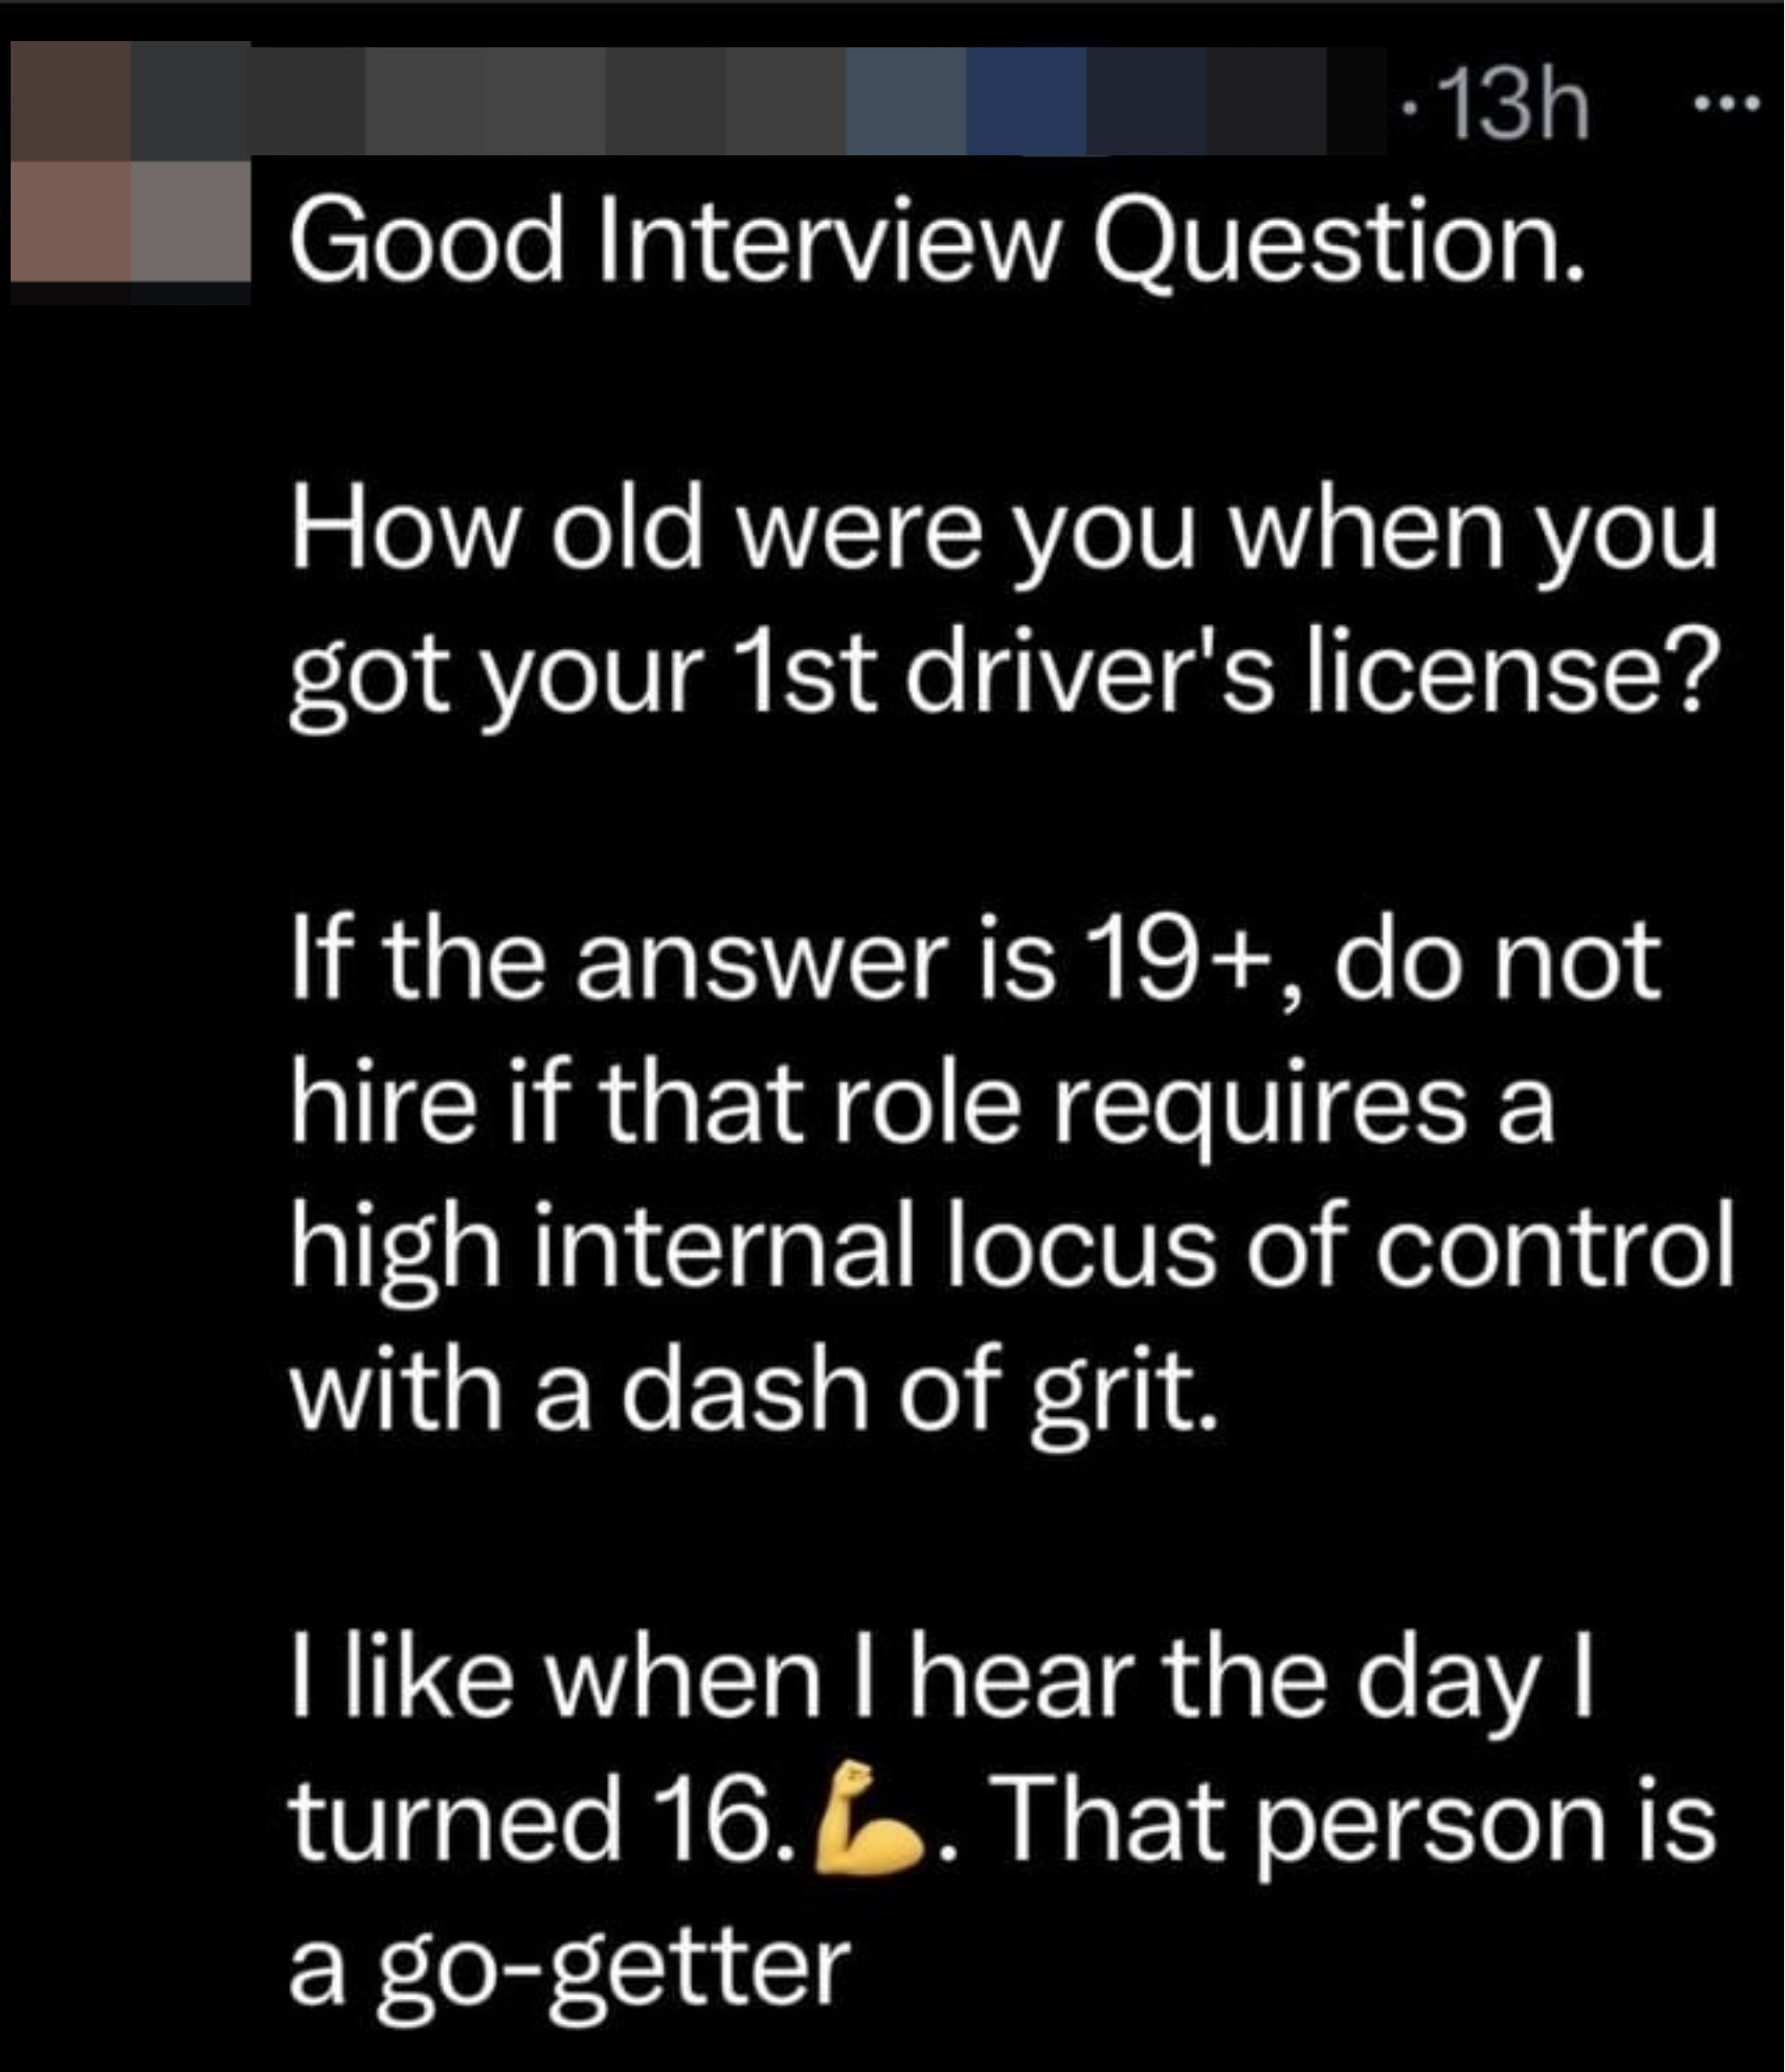 Good interview question: &quot;How old were you when you got your 1st driver&#x27;s license?&quot; If it&#x27;s 19+, don&#x27;t hire them if the &quot;role requires a high internal locus of control with a dash of grit&quot;;  preferred answer: &quot;The day I turned 16&quot;